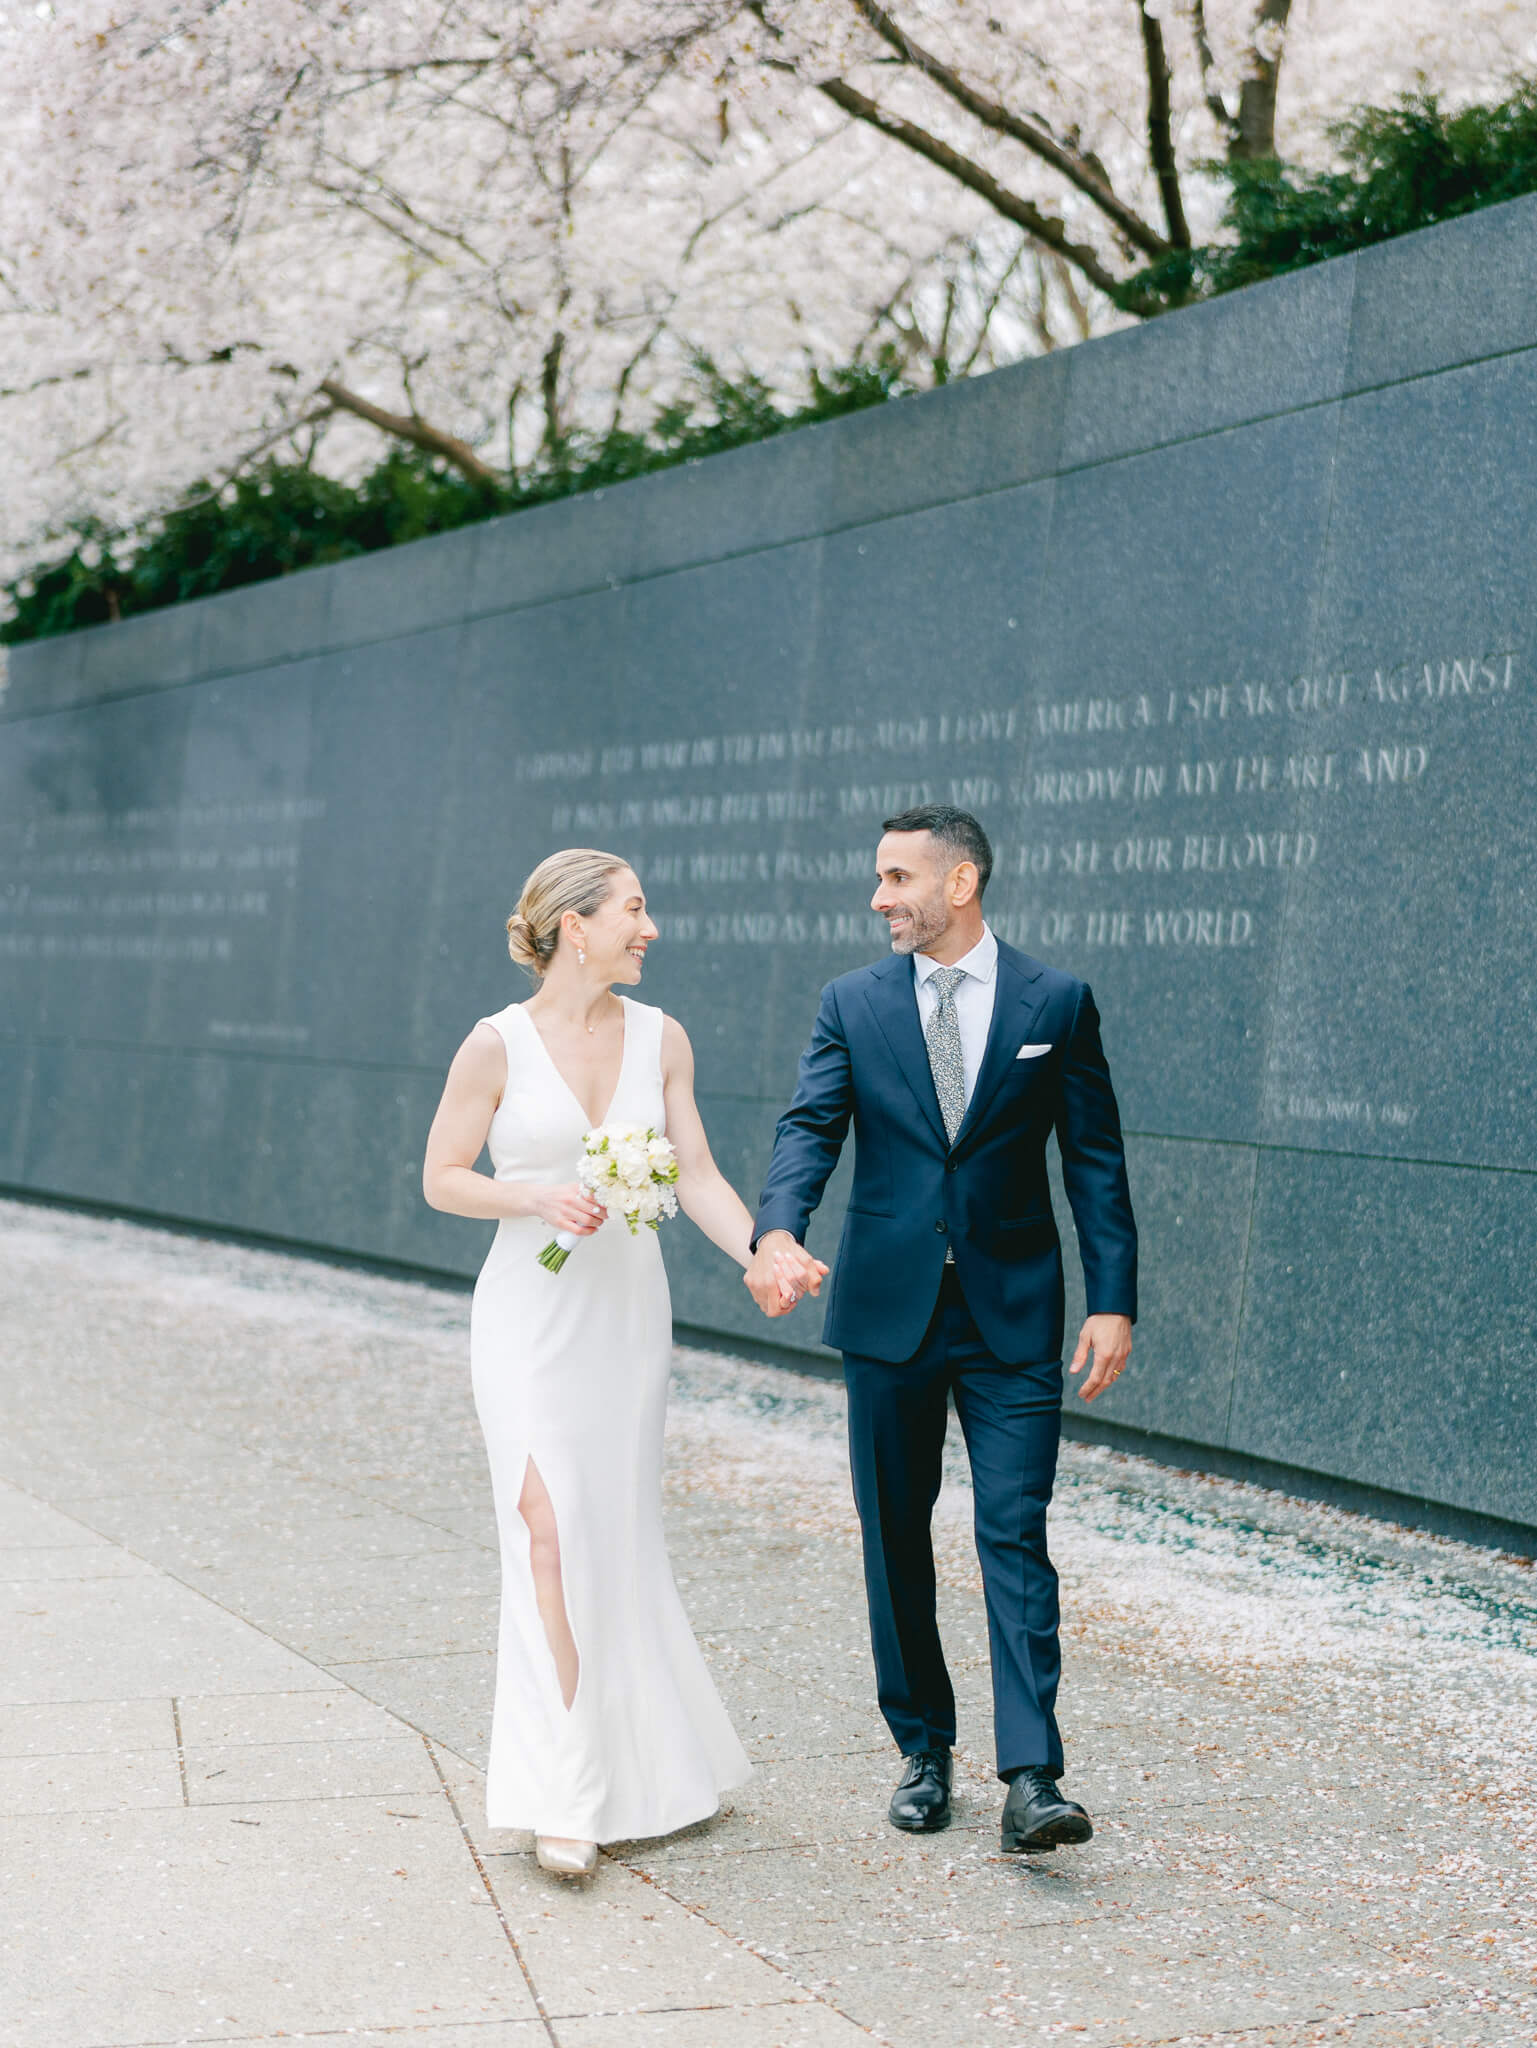 A bride and groom walking hand in hand while looking at each other under the cherry blossom trees at the MLK Memorial in Washington, D.C.